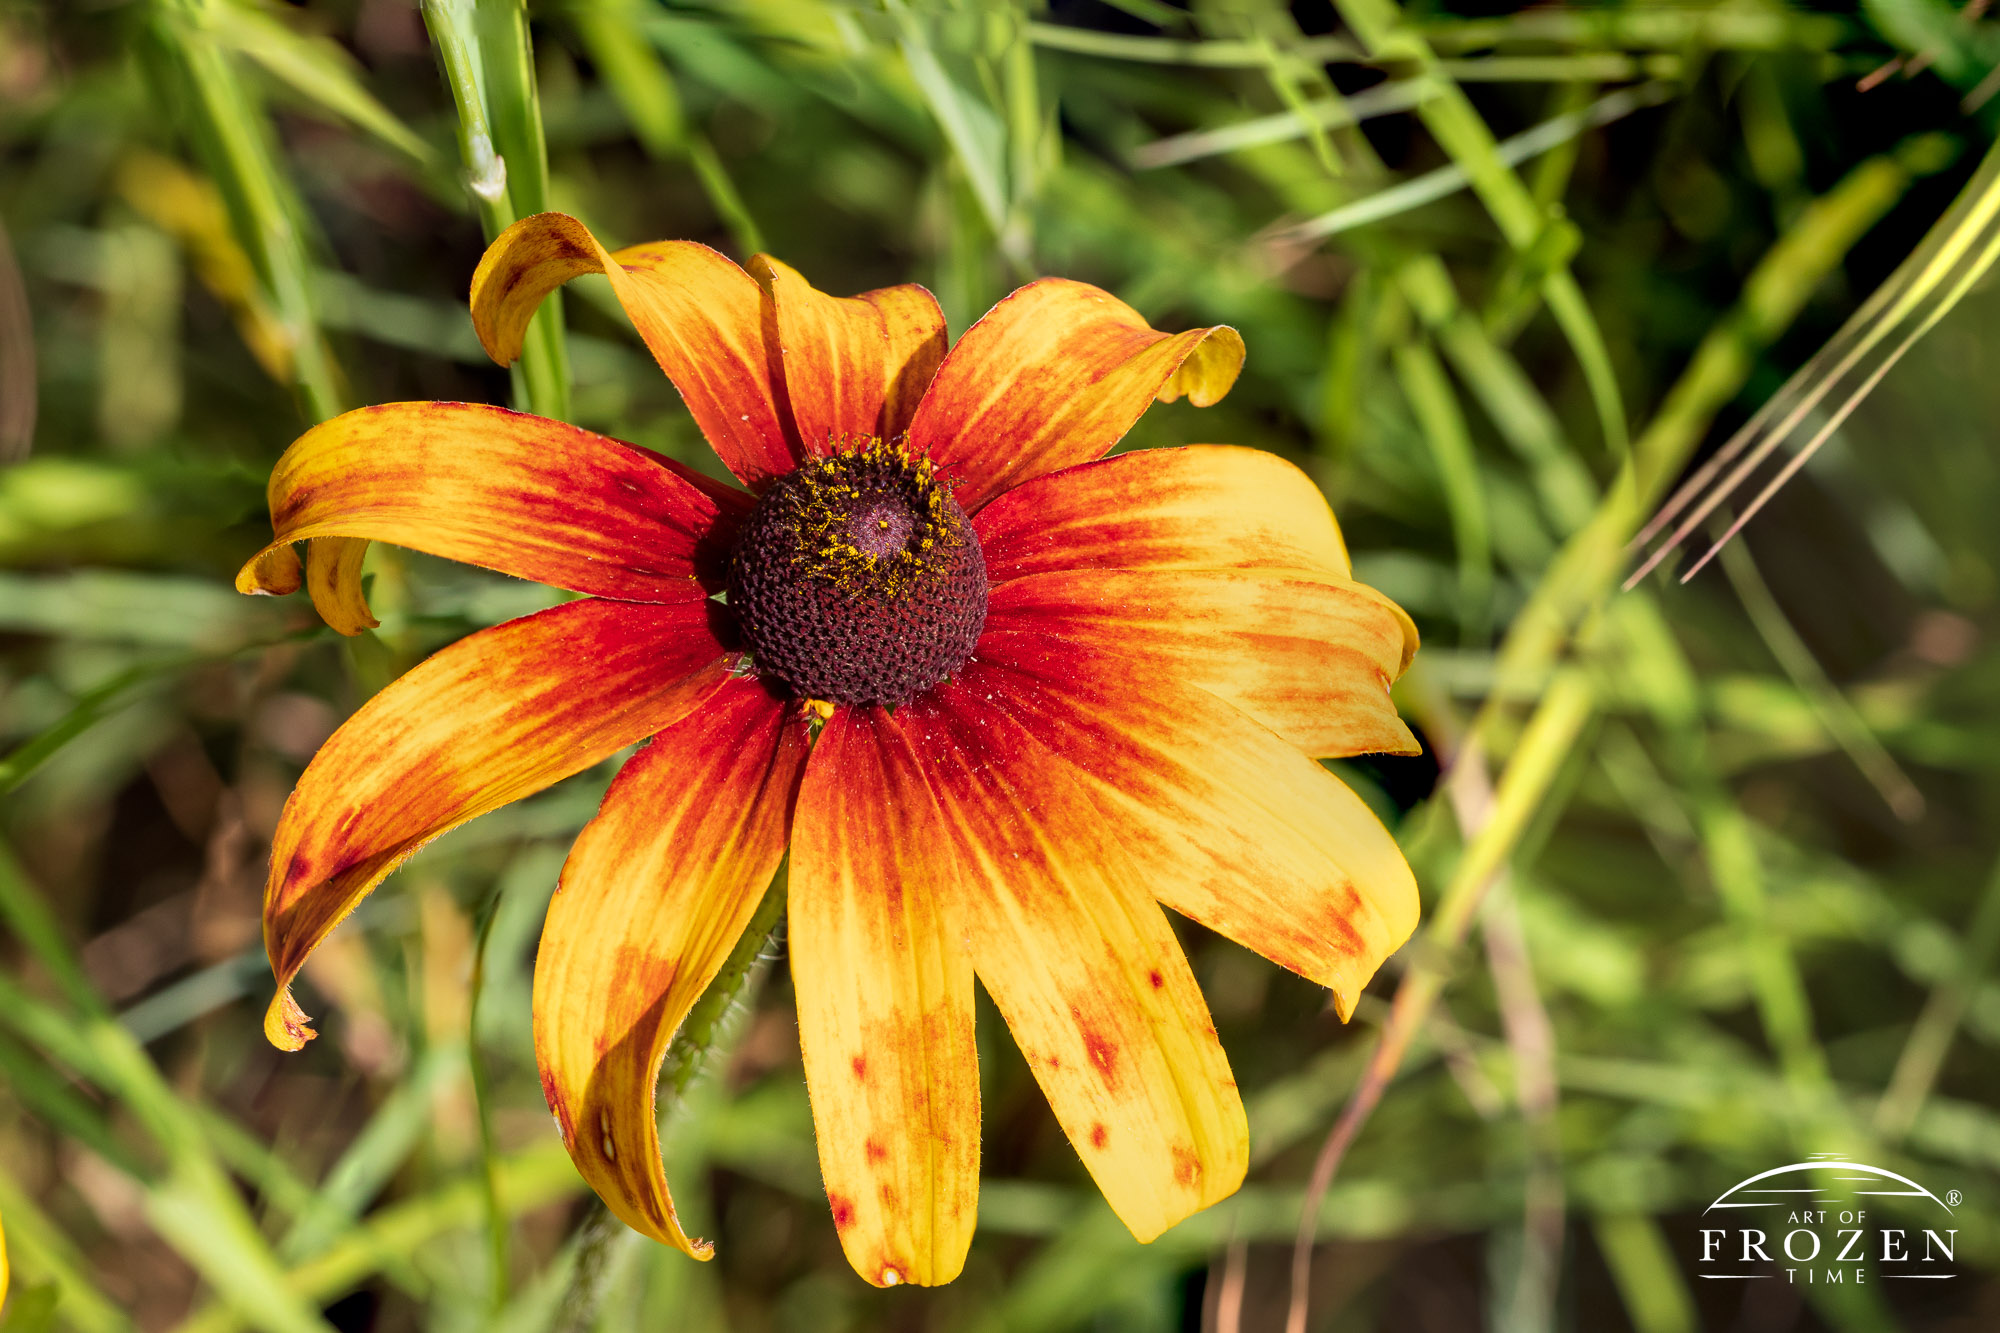 A colorful Black-eyed Susan Cappuccino near Bellbrook Ohio which displays yellow leaves which turn shades of orange and red towards the flower center